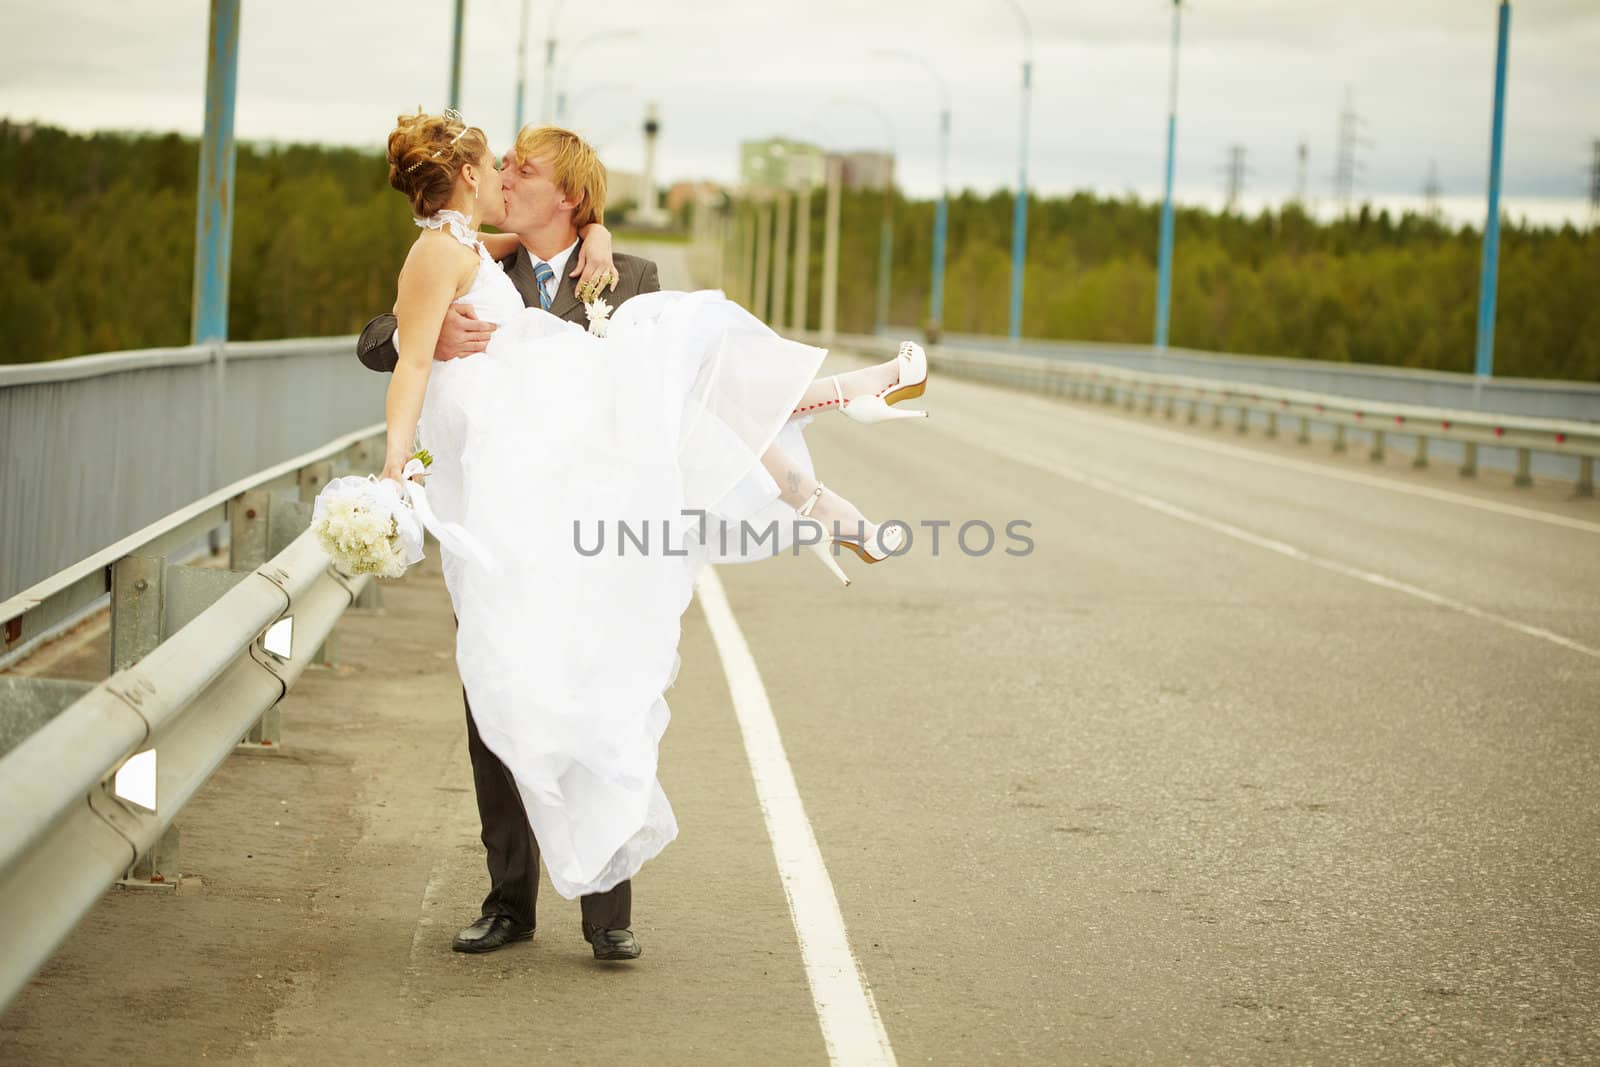 The groom carries his bride in his arms on the bridge